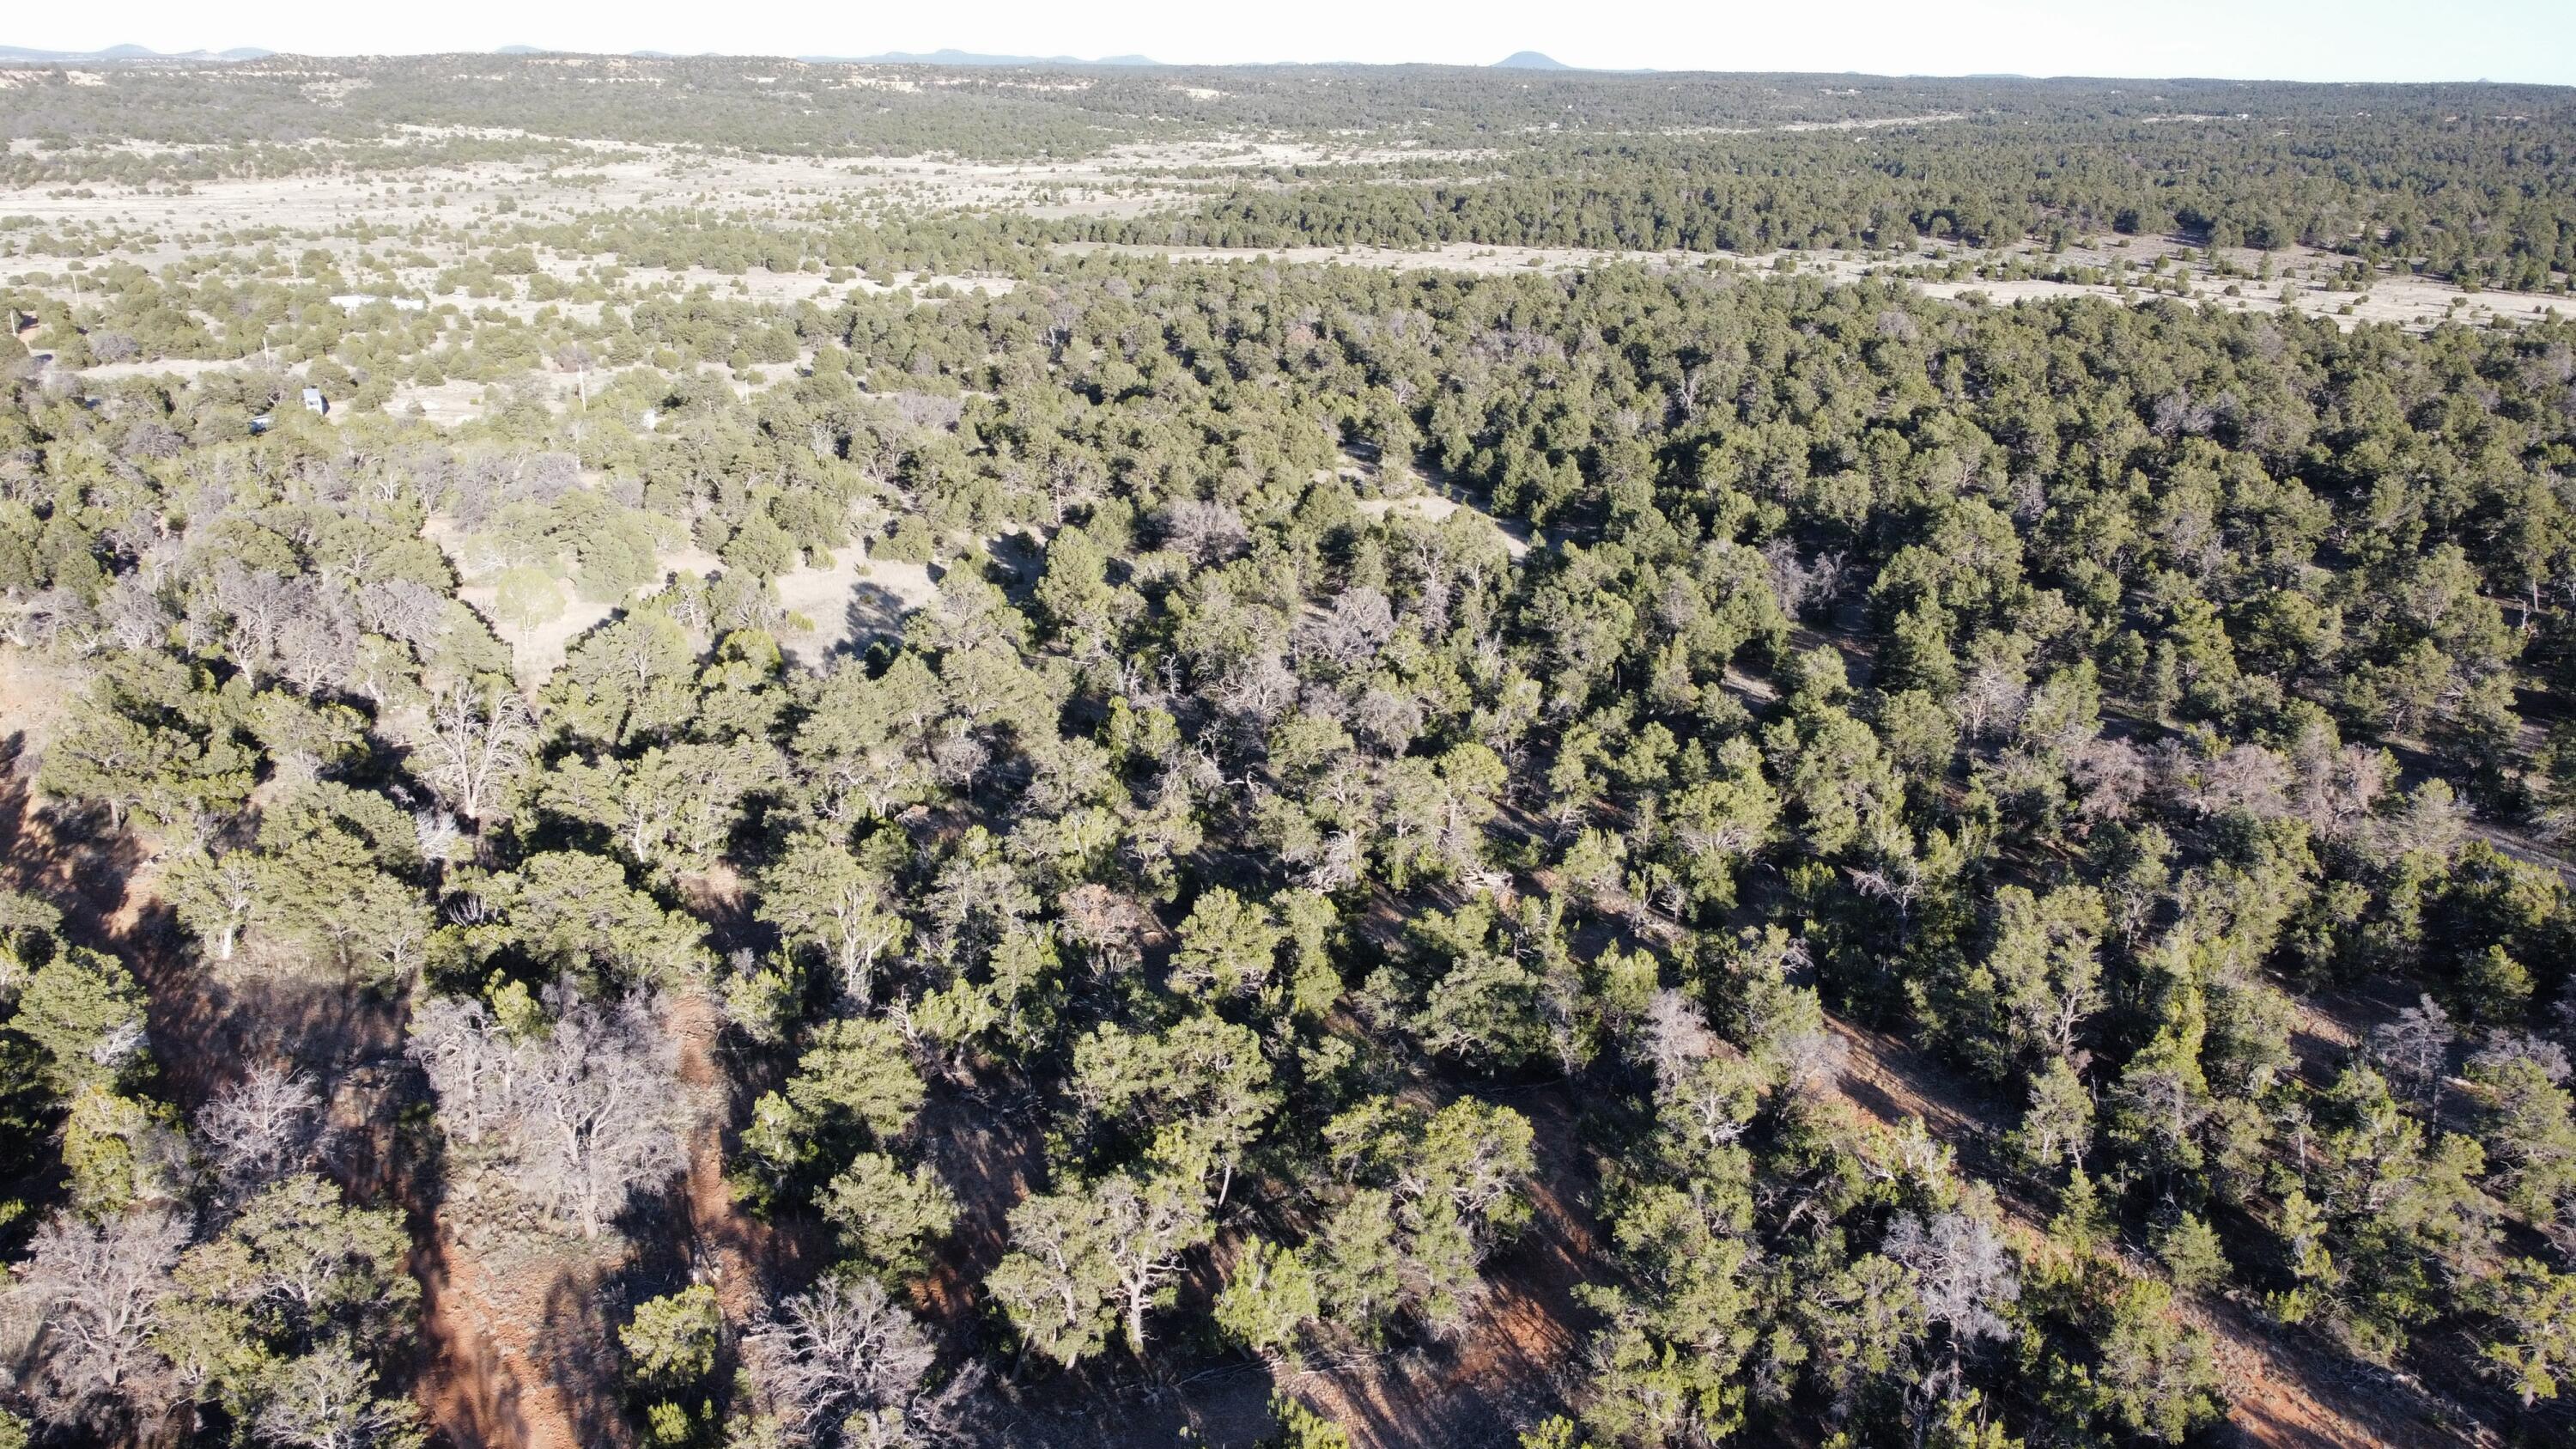 Tbd Clements Loop, Ramah, New Mexico 87321, ,Land,For Sale,Tbd Clements Loop,1034225